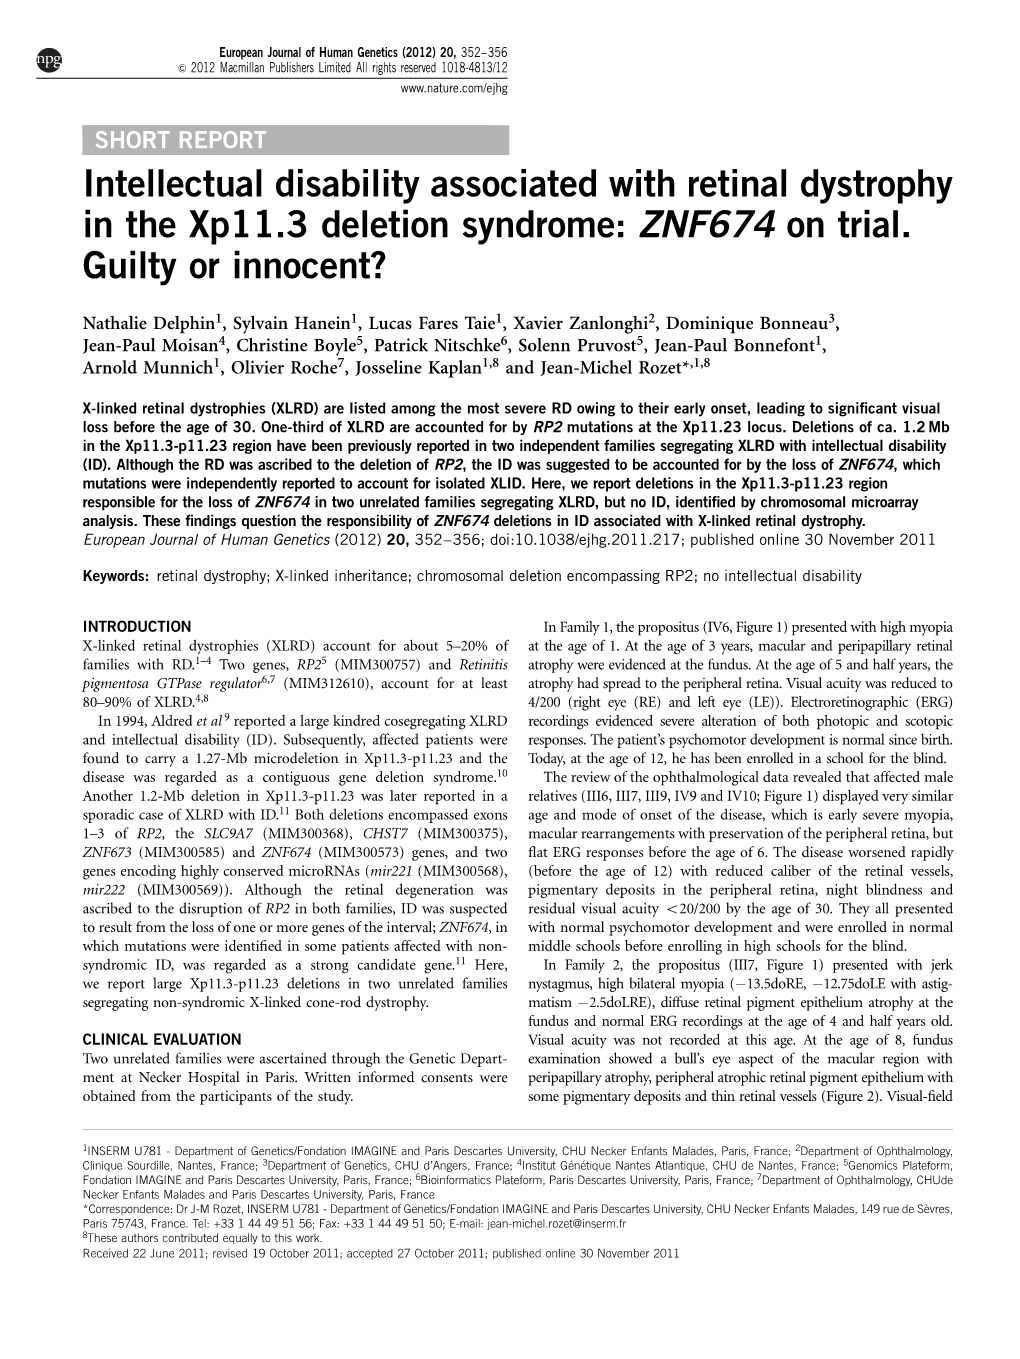 Intellectual Disability Associated with Retinal Dystrophy in the Xp11.3 Deletion Syndrome: ZNF674 on Trial